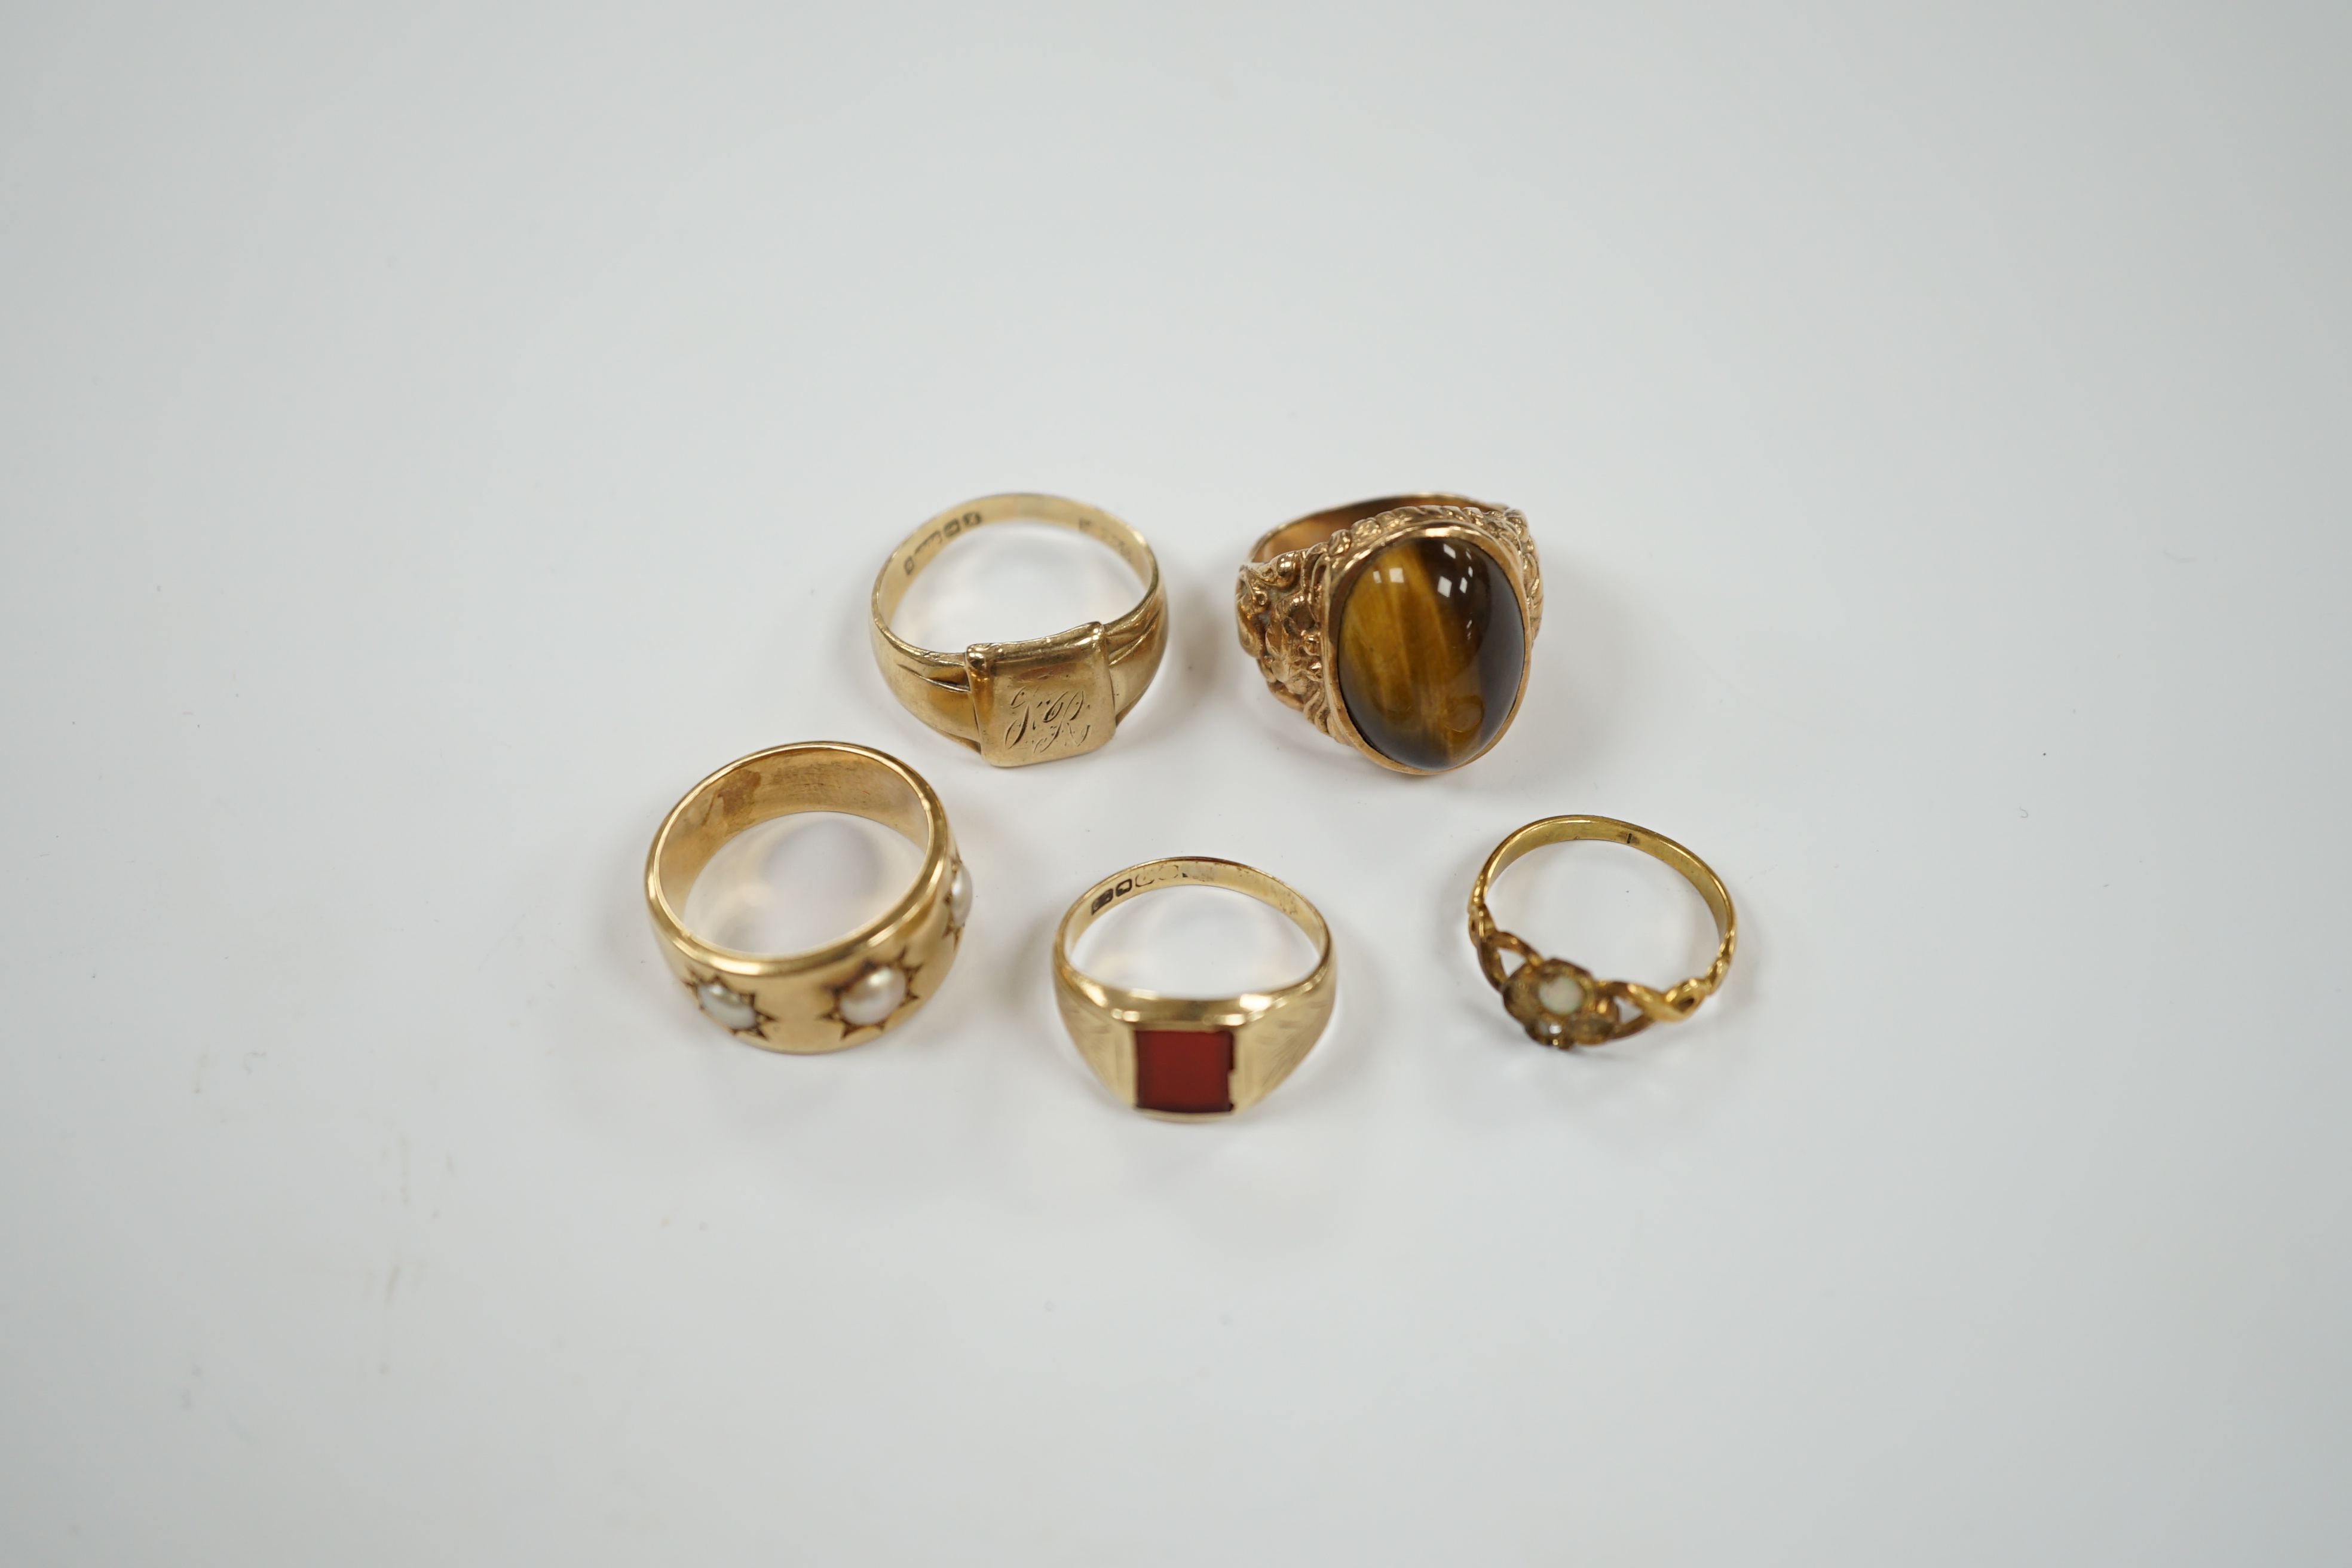 A 9ct gold signet ring, a gold and carnelian set signet ring and three yellow metal rings one set with three split pearls and one set with tiger's eye quartz cabochon, gross weight 29.7 grams.